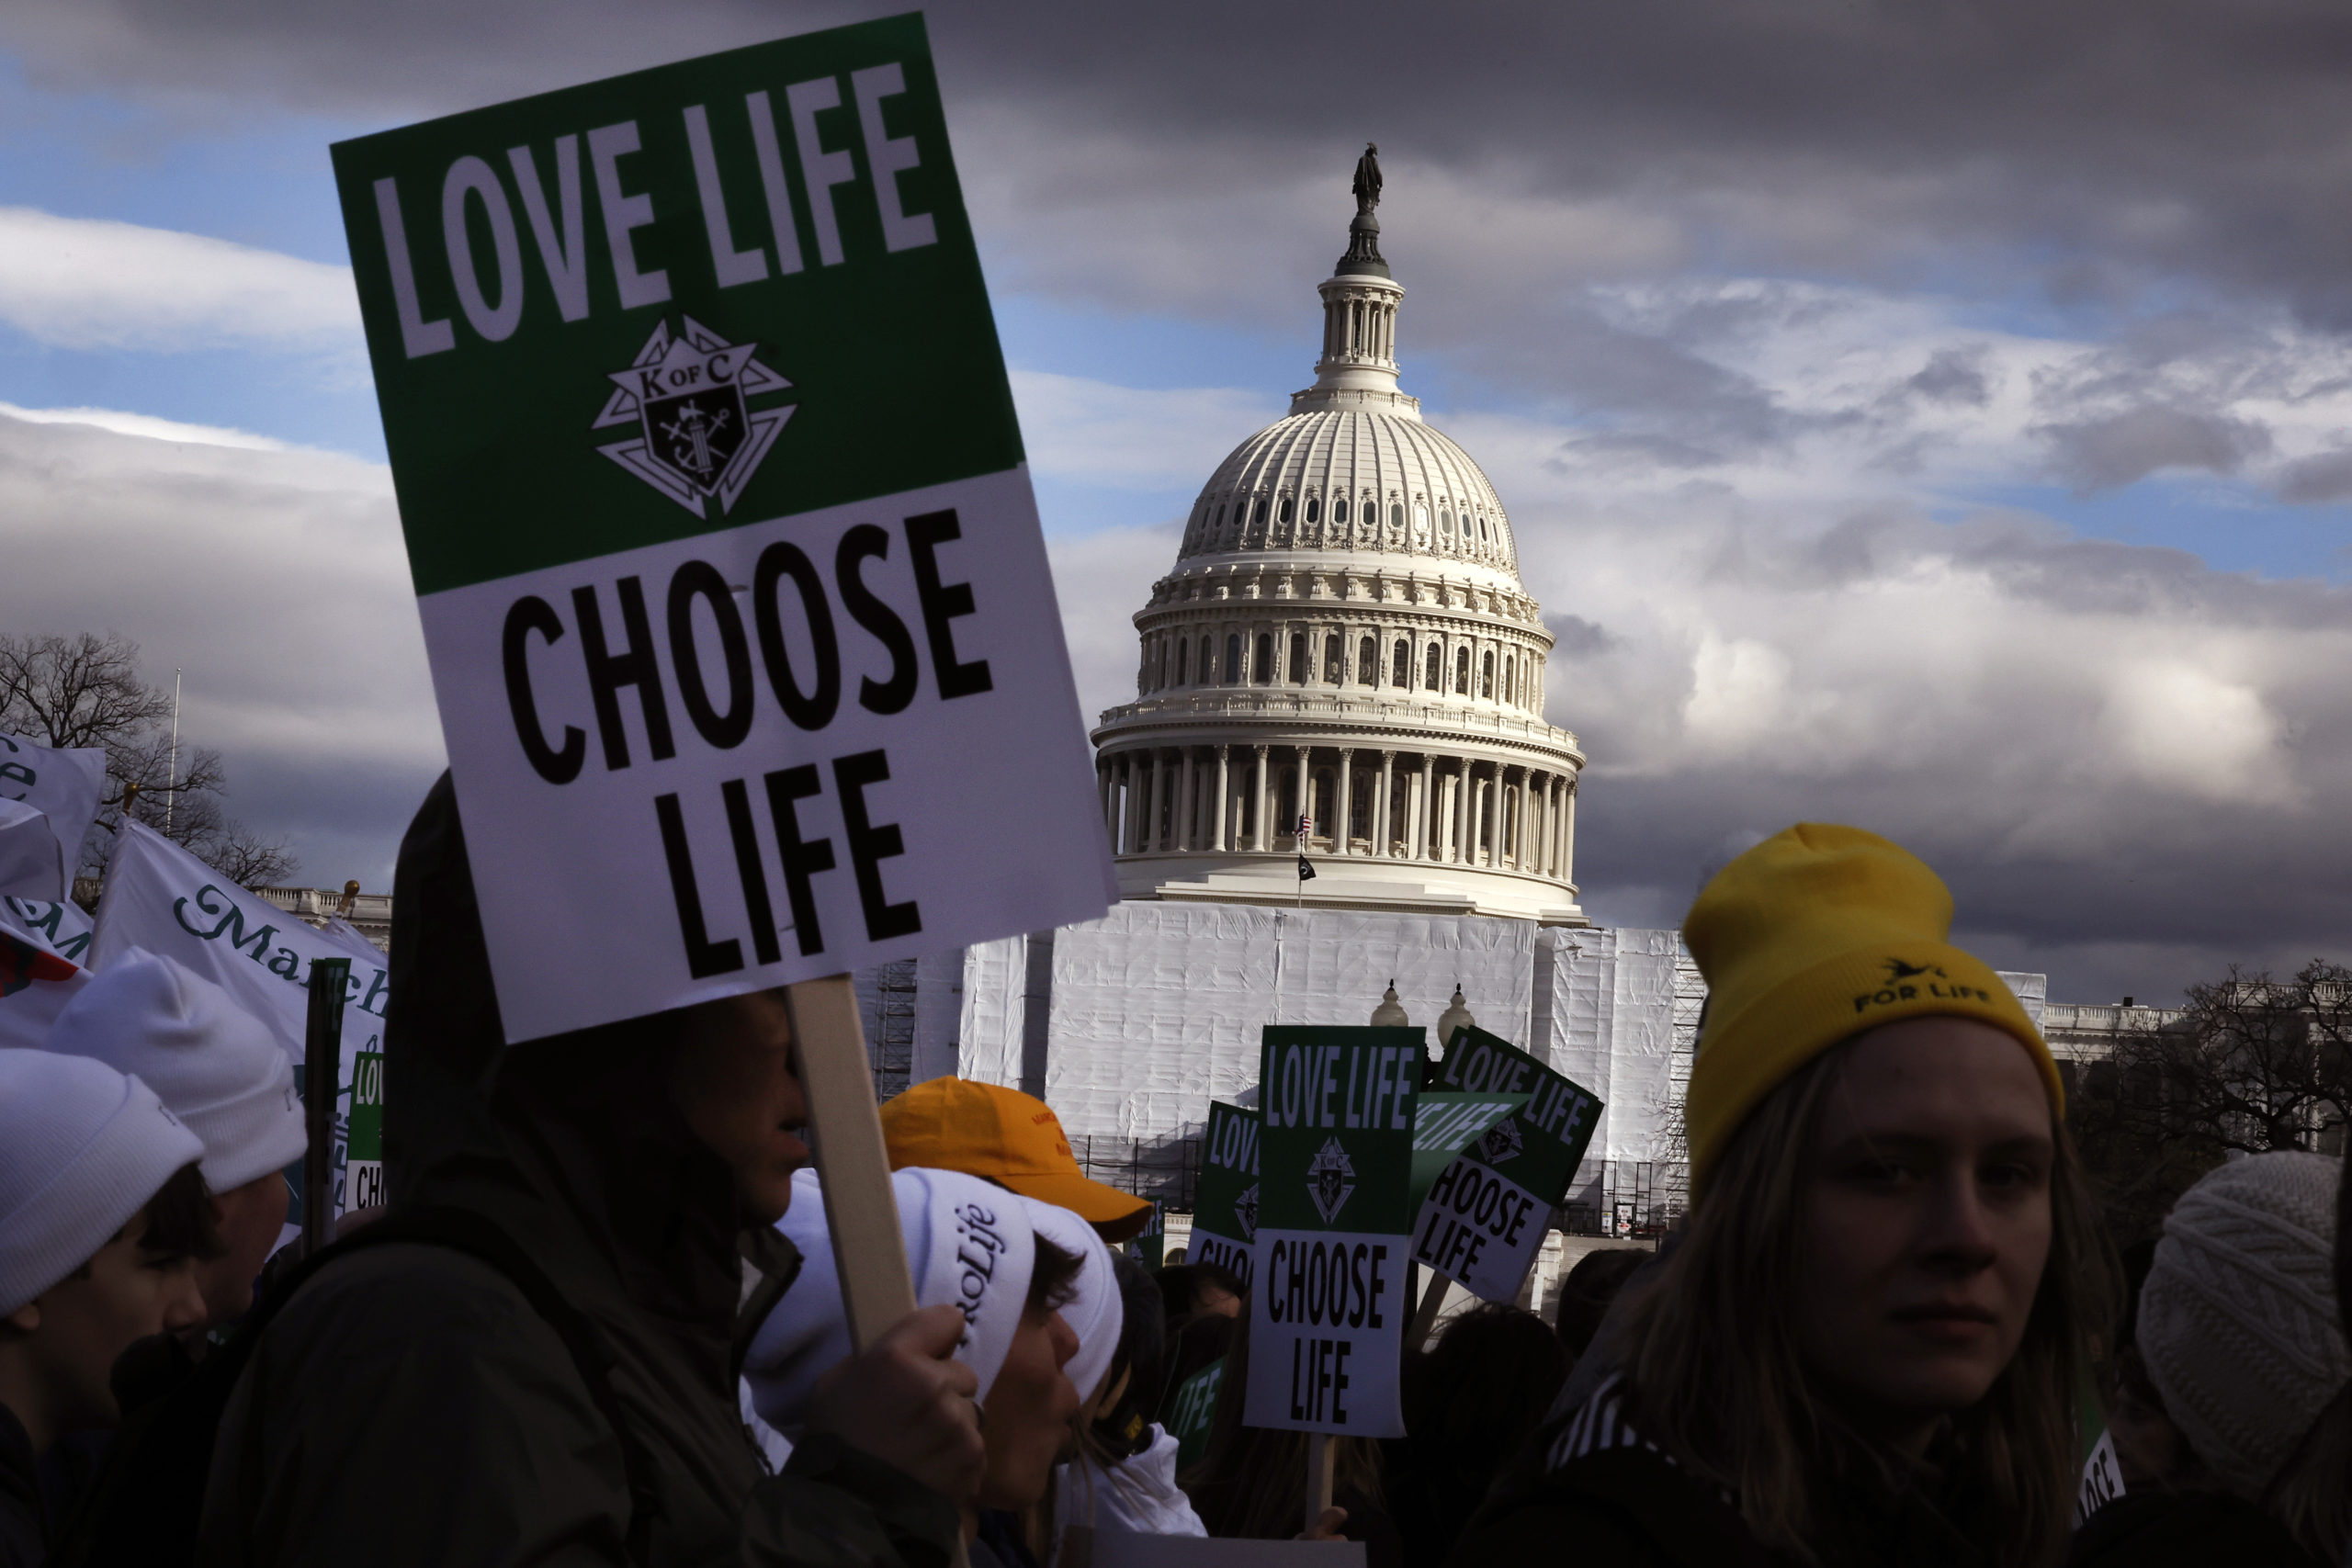 Annual March For Life Held In Washington, D.C.